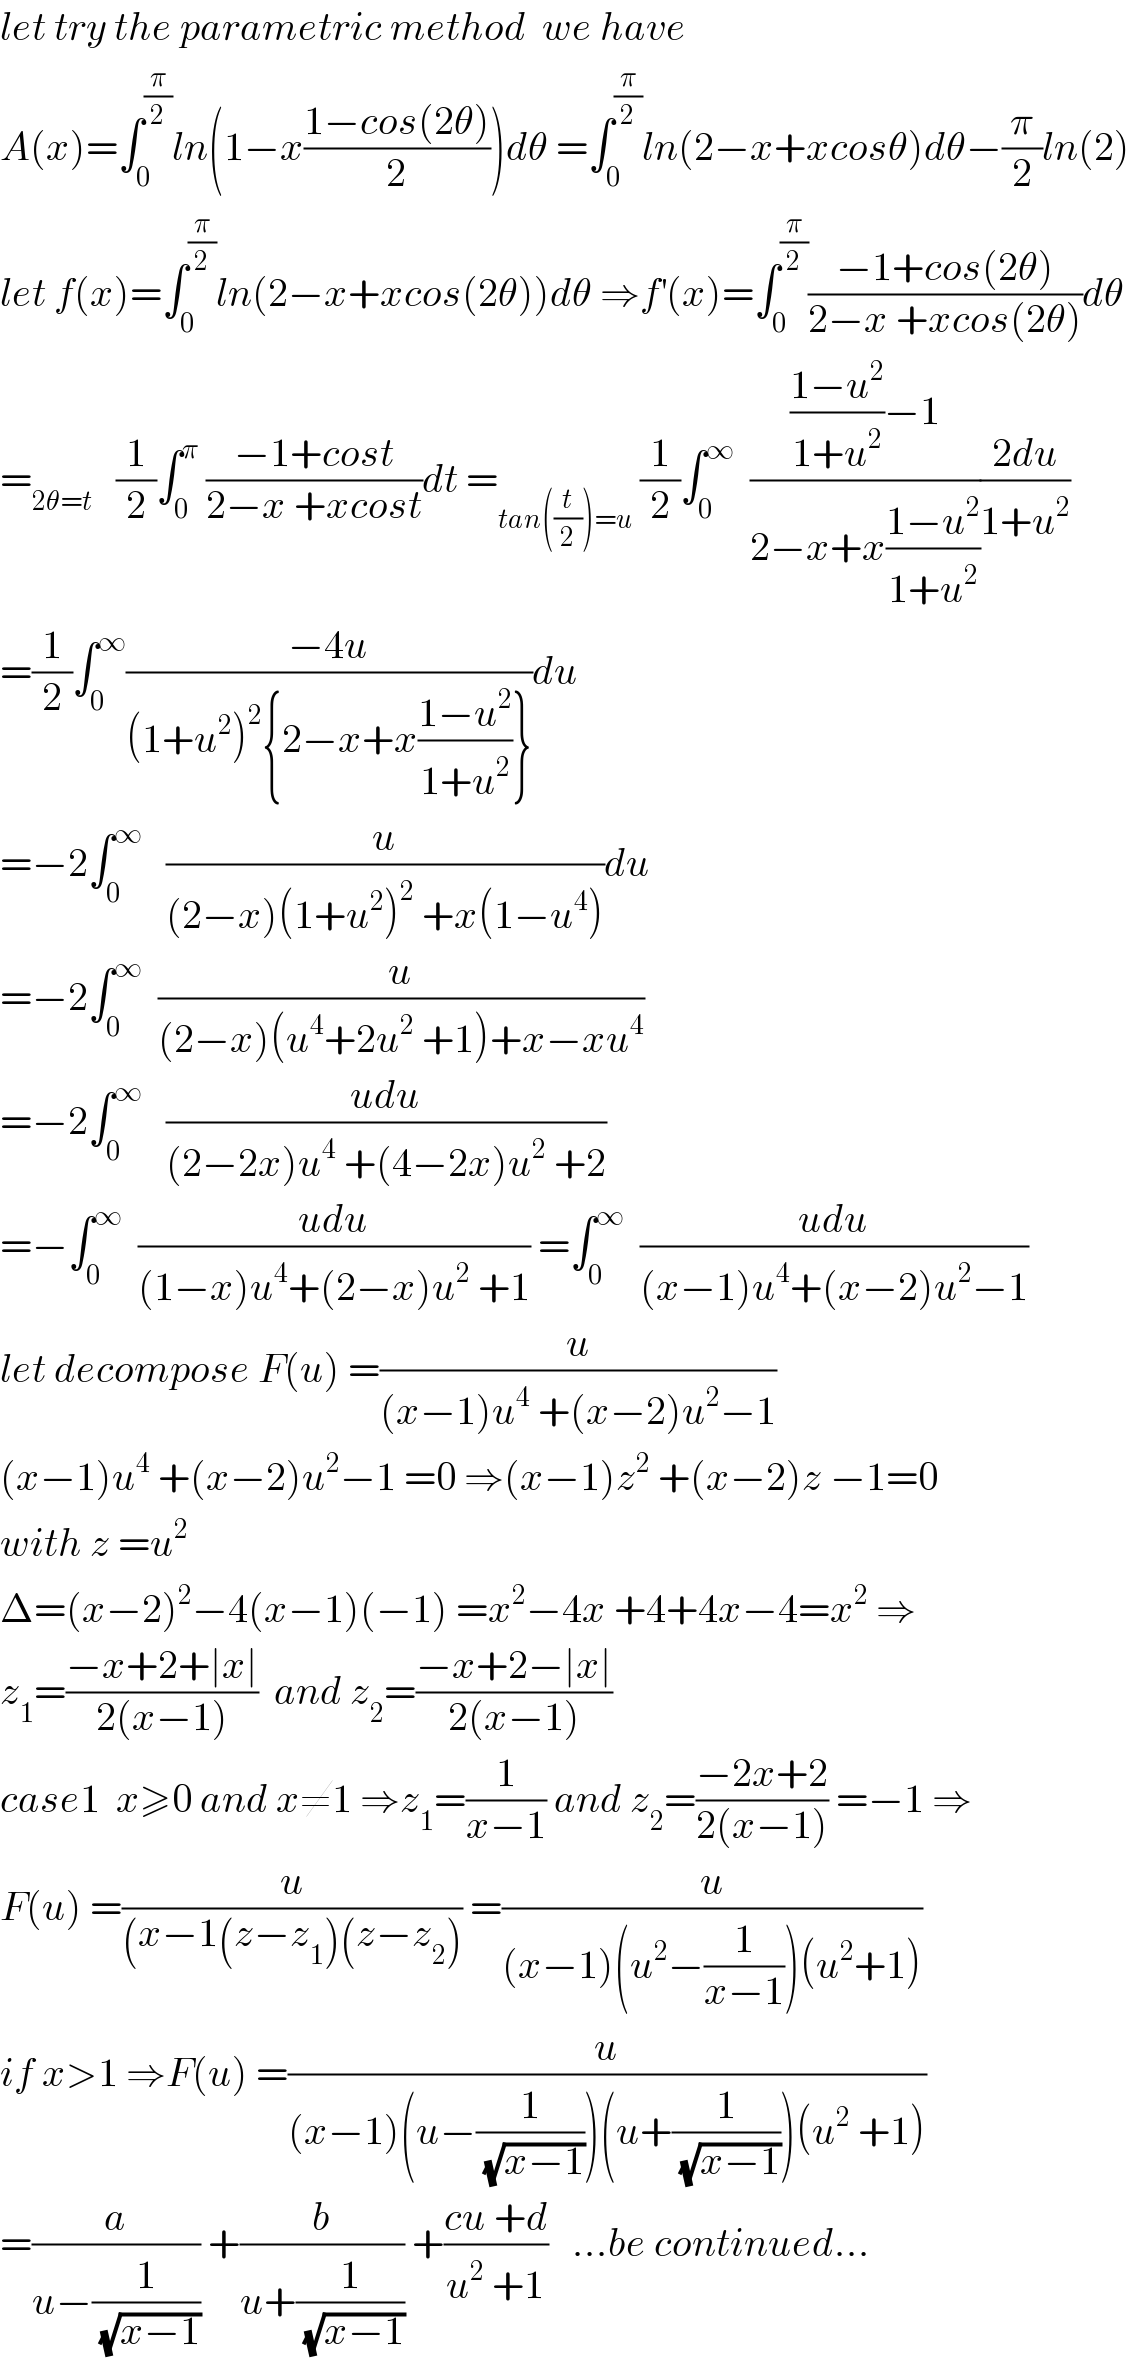 let try the parametric method  we have  A(x)=∫_0 ^(π/2) ln(1−x((1−cos(2θ))/2))dθ =∫_0 ^(π/2) ln(2−x+xcosθ)dθ−(π/2)ln(2)  let f(x)=∫_0 ^(π/2) ln(2−x+xcos(2θ))dθ ⇒f^′ (x)=∫_0 ^(π/2) ((−1+cos(2θ))/(2−x +xcos(2θ)))dθ  =_(2θ=t)    (1/2)∫_0 ^π  ((−1+cost)/(2−x +xcost))dt =_(tan((t/2))=u)  (1/2)∫_0 ^∞   ((((1−u^2 )/(1+u^2 ))−1)/(2−x+x((1−u^2 )/(1+u^2 ))))((2du)/(1+u^2 ))  =(1/2)∫_0 ^∞ ((−4u)/((1+u^2 )^2 {2−x+x((1−u^2 )/(1+u^2 ))}))du  =−2∫_0 ^∞    (u/((2−x)(1+u^2 )^2  +x(1−u^4 )))du  =−2∫_0 ^∞   (u/((2−x)(u^4 +2u^2  +1)+x−xu^4 ))  =−2∫_0 ^∞    ((udu)/((2−2x)u^4  +(4−2x)u^2  +2))  =−∫_0 ^∞   ((udu)/((1−x)u^4 +(2−x)u^2  +1)) =∫_0 ^∞   ((udu)/((x−1)u^4 +(x−2)u^2 −1))  let decompose F(u) =(u/((x−1)u^4  +(x−2)u^2 −1))  (x−1)u^4  +(x−2)u^2 −1 =0 ⇒(x−1)z^2  +(x−2)z −1=0  with z =u^2   Δ=(x−2)^2 −4(x−1)(−1) =x^2 −4x +4+4x−4=x^2  ⇒  z_1 =((−x+2+∣x∣)/(2(x−1)))  and z_2 =((−x+2−∣x∣)/(2(x−1)))  case1  x≥0 and x≠1 ⇒z_1 =(1/(x−1)) and z_2 =((−2x+2)/(2(x−1))) =−1 ⇒  F(u) =(u/((x−1(z−z_1 )(z−z_2 ))) =(u/((x−1)(u^2 −(1/(x−1)))(u^2 +1)))  if x>1 ⇒F(u) =(u/((x−1)(u−(1/(√(x−1))))(u+(1/(√(x−1))))(u^2  +1)))  =(a/(u−(1/(√(x−1))))) +(b/(u+(1/(√(x−1))))) +((cu +d)/(u^2  +1))   ...be continued...  